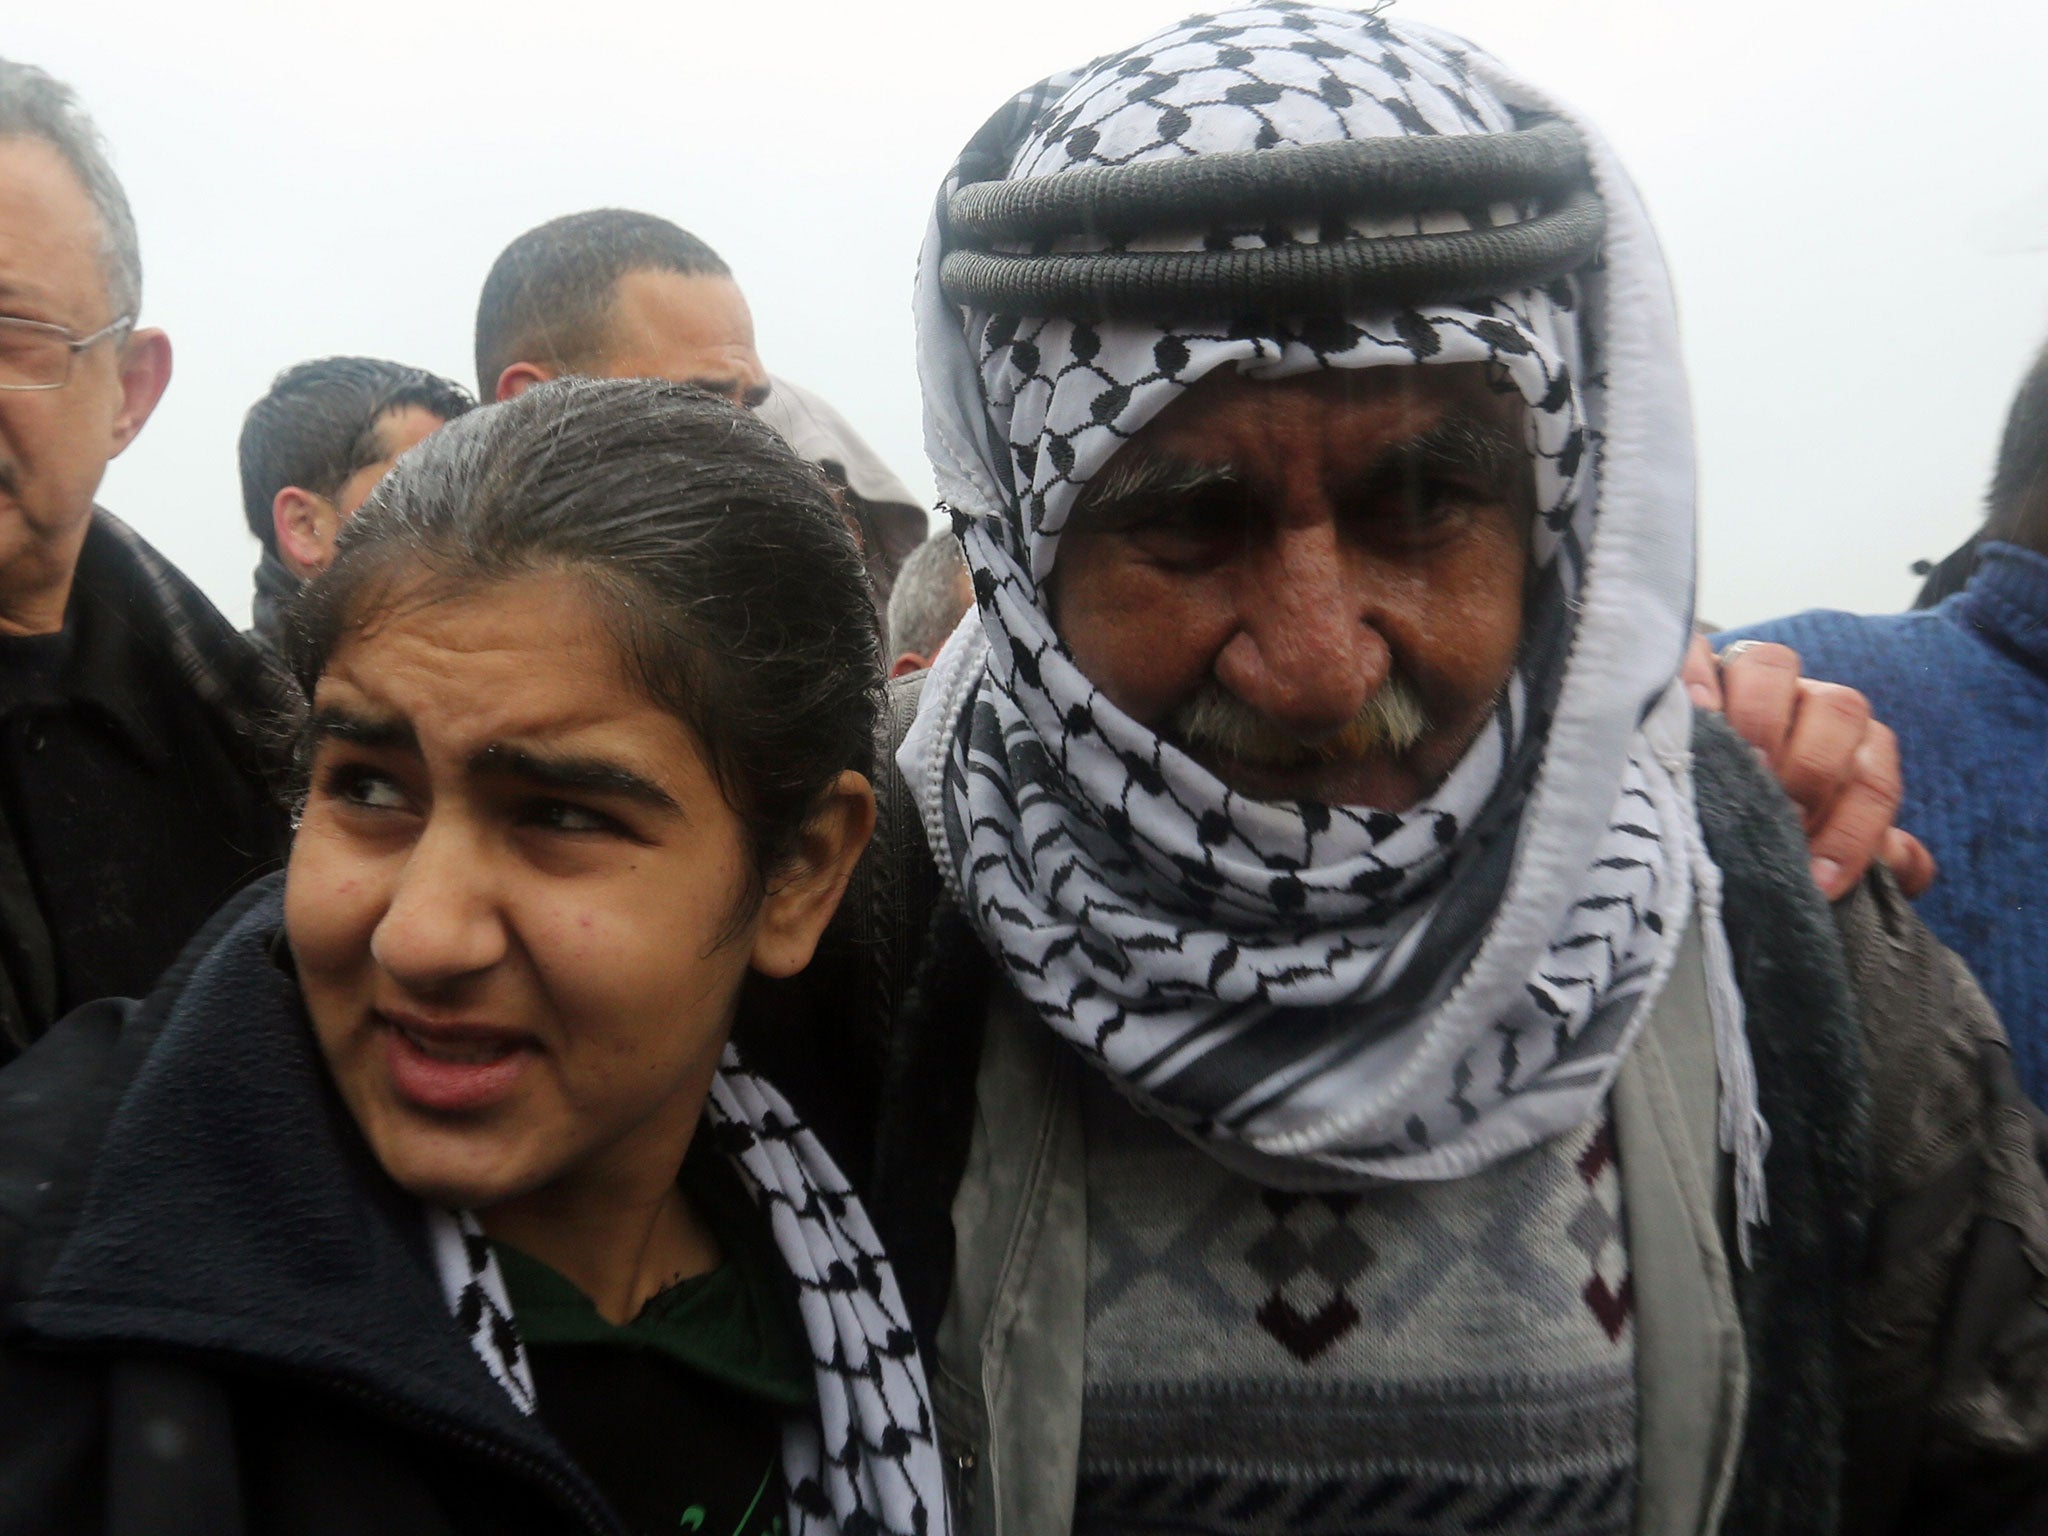 Palestinian 14-year-old Malak al-Khatib is greeted by her father after her release from an Israeli jail on February 13